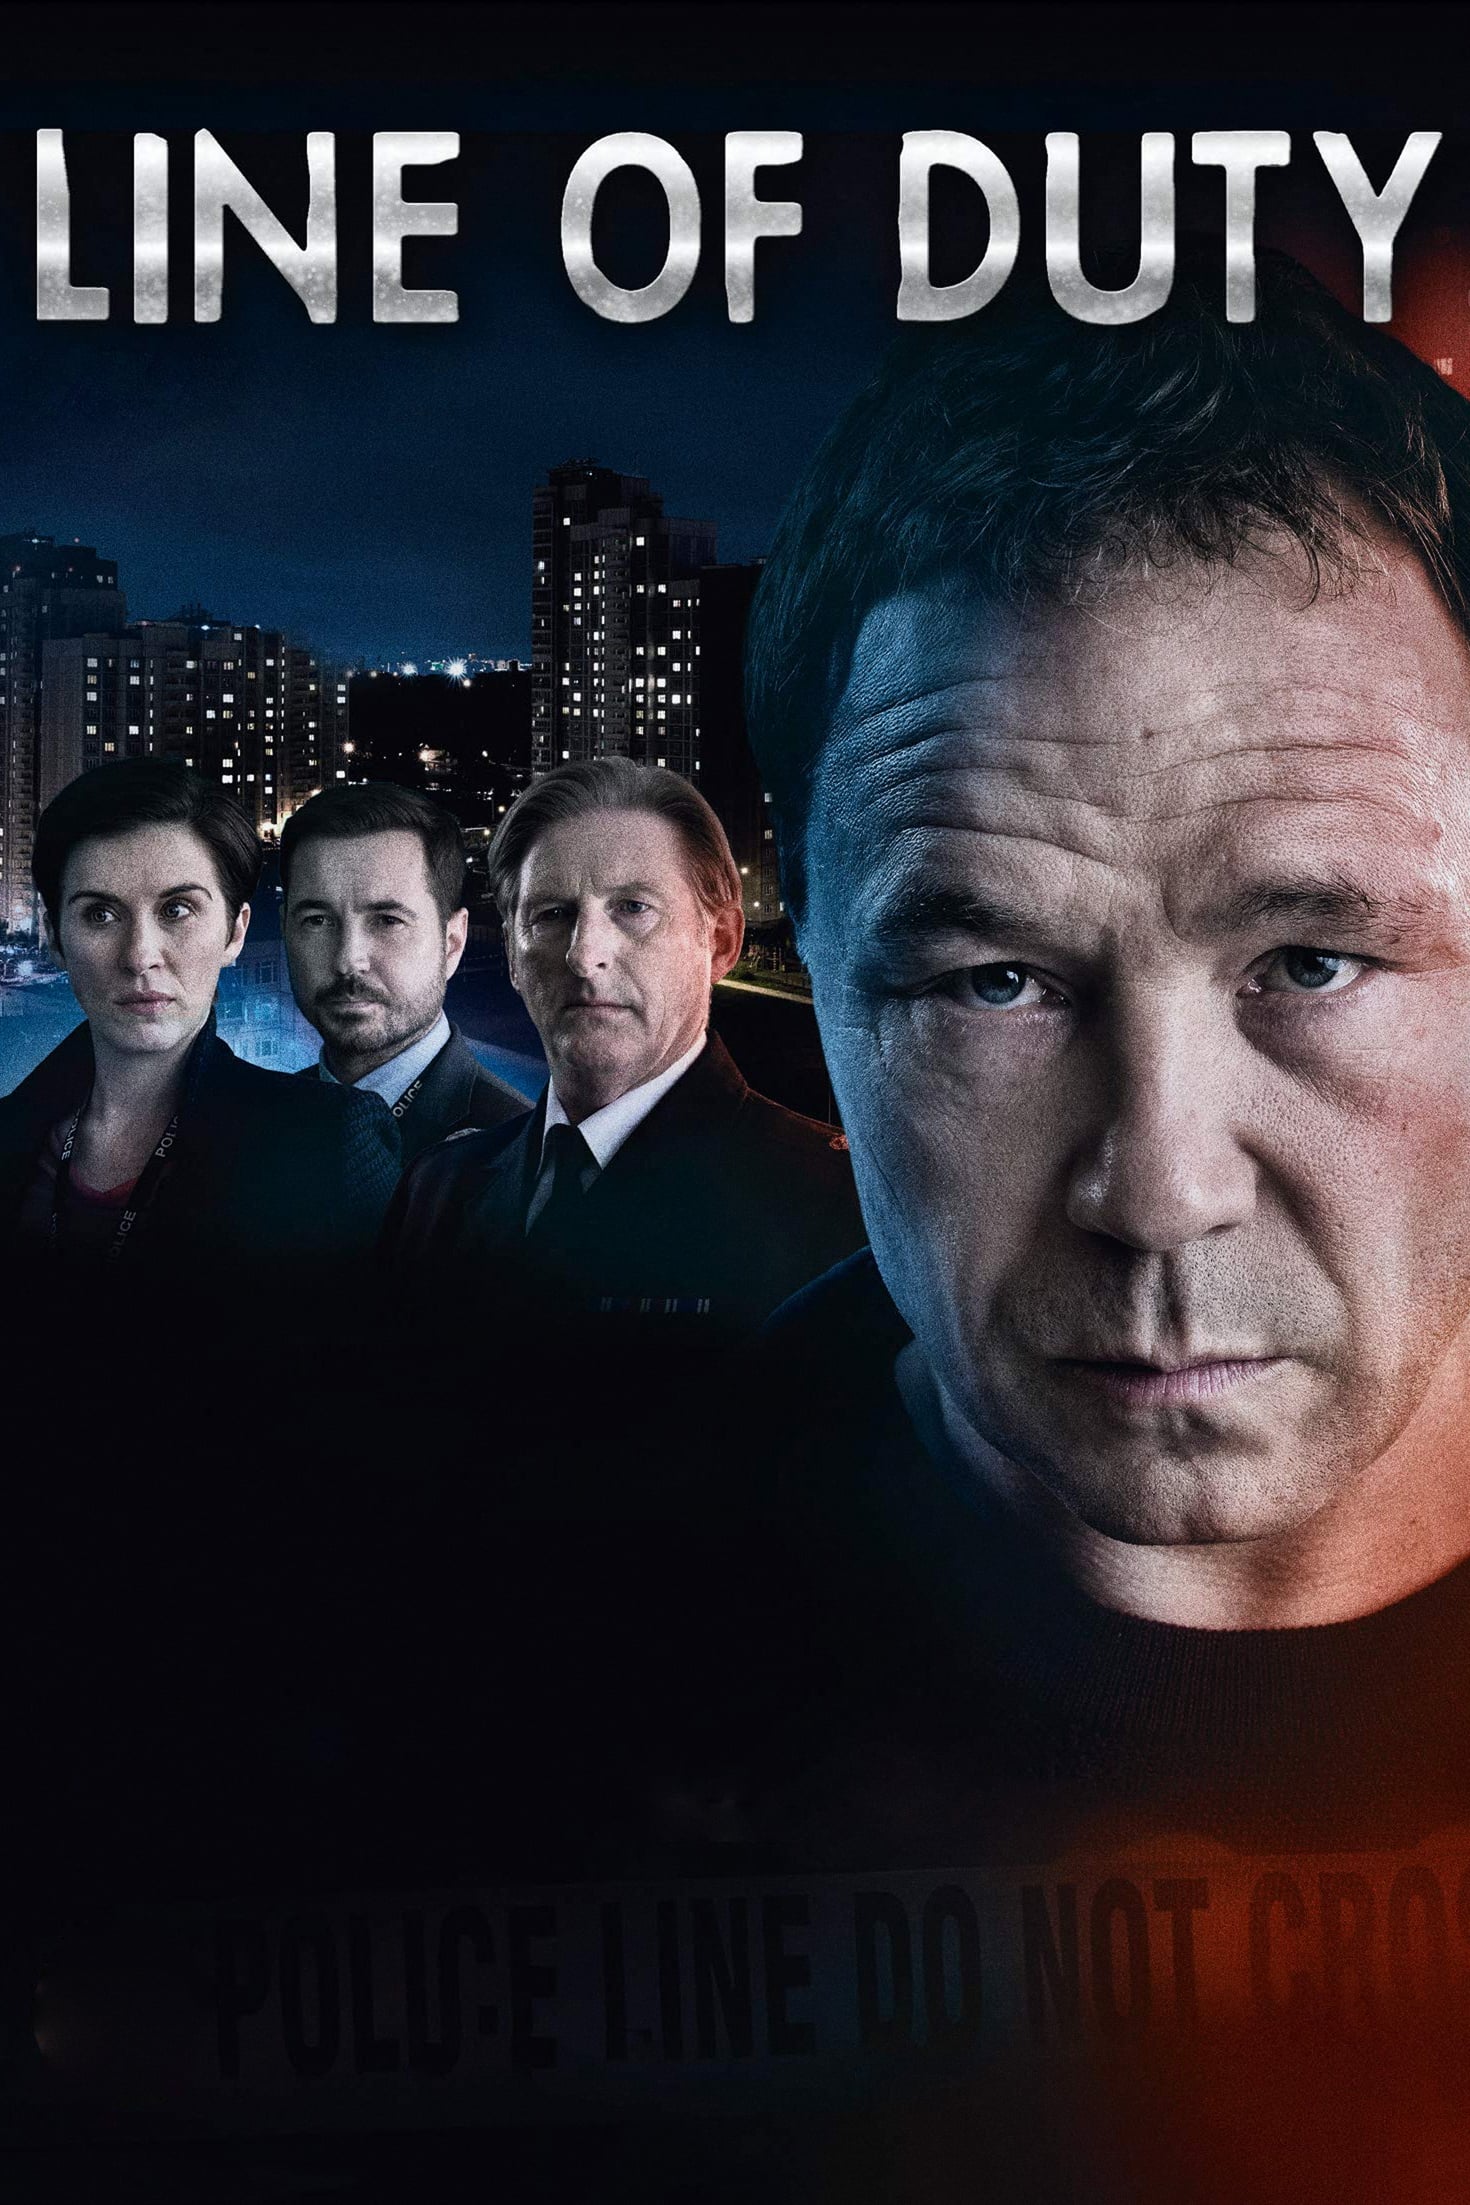 Line of Duty rating